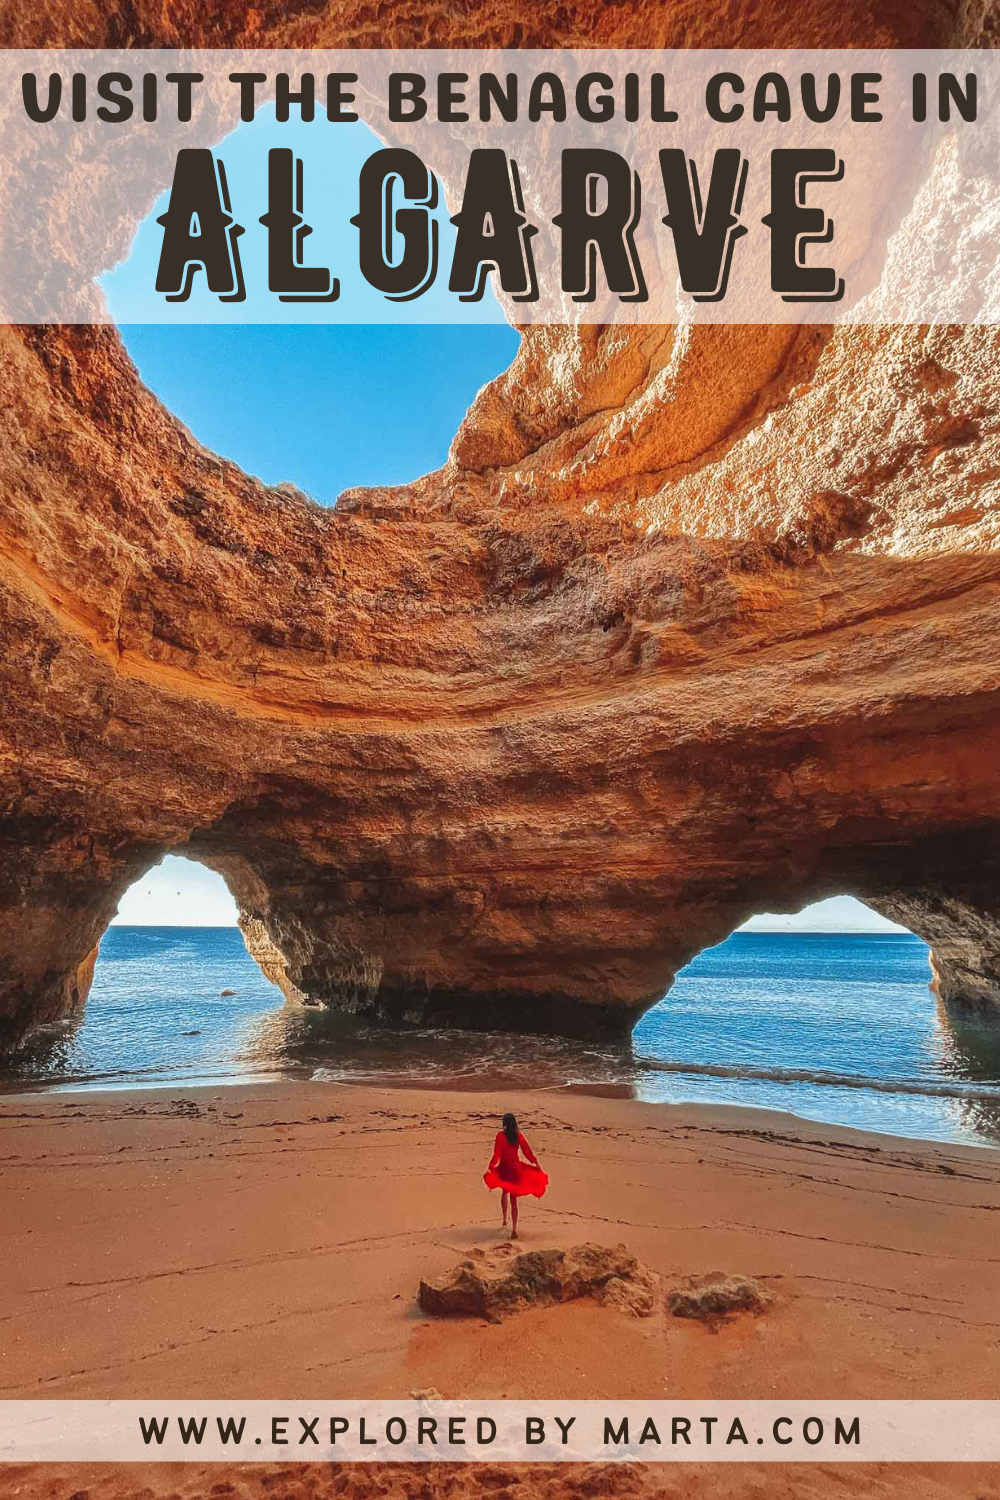 How to get to the Benagil cave in Algarve